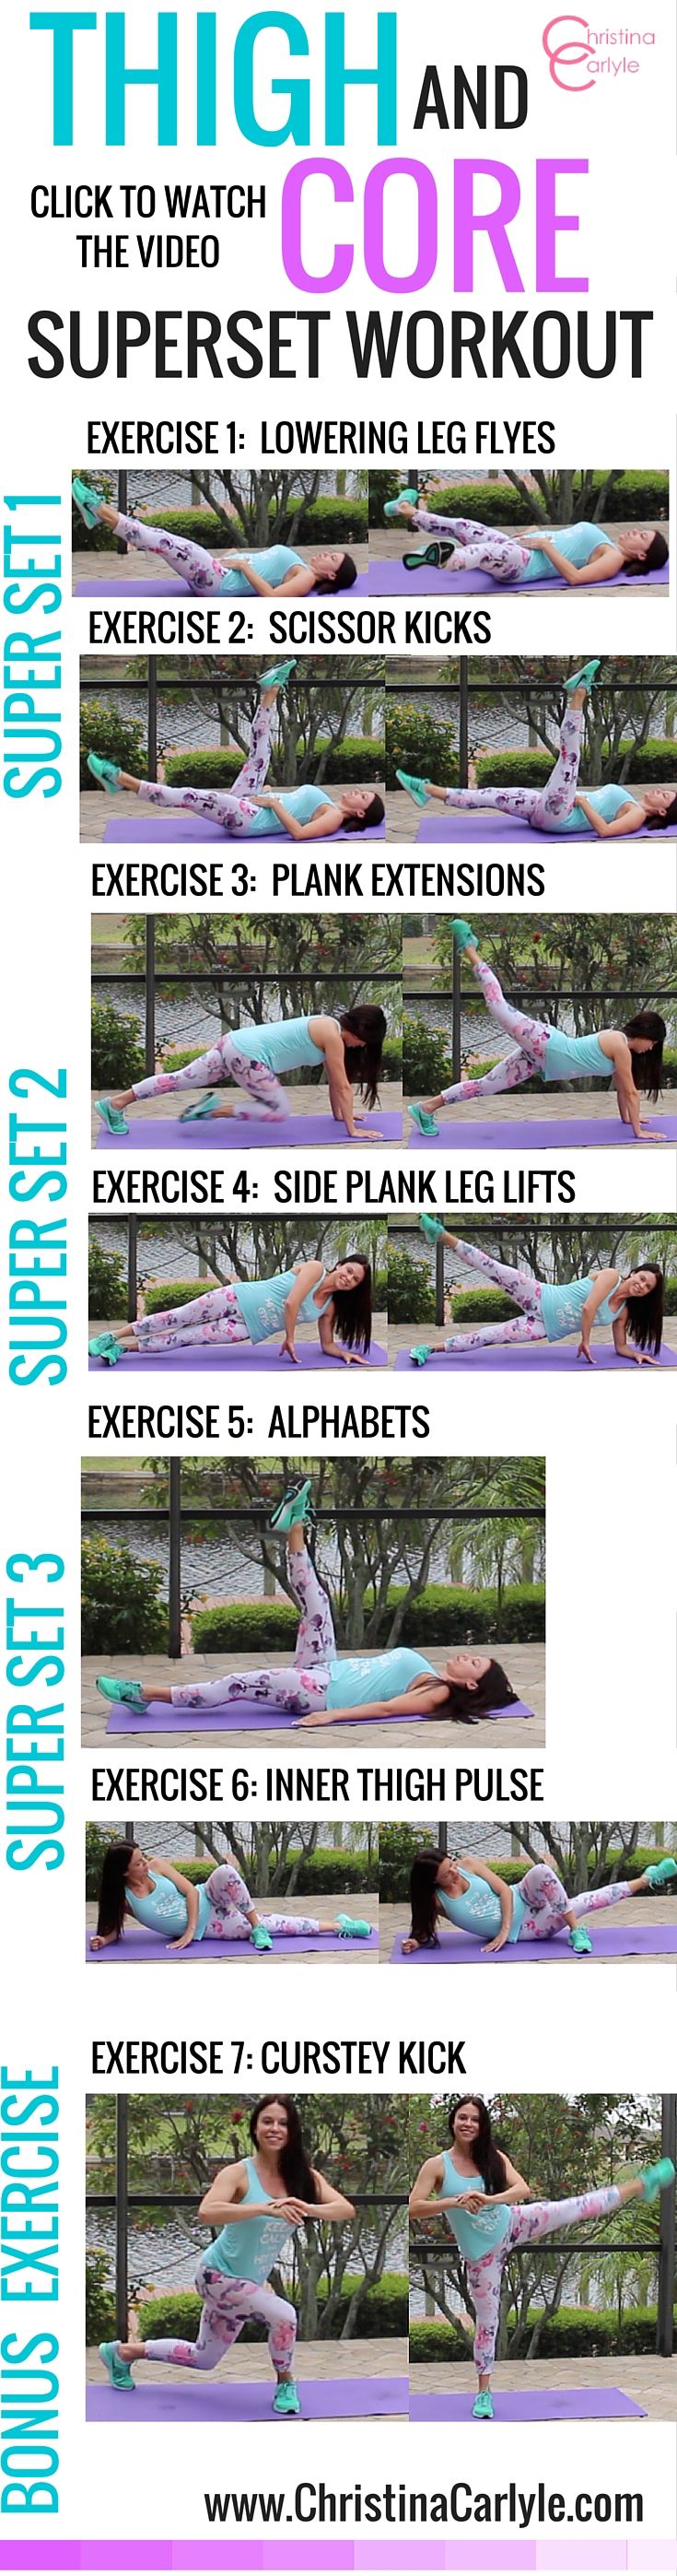 thigh and core workout for women - christina carlyle